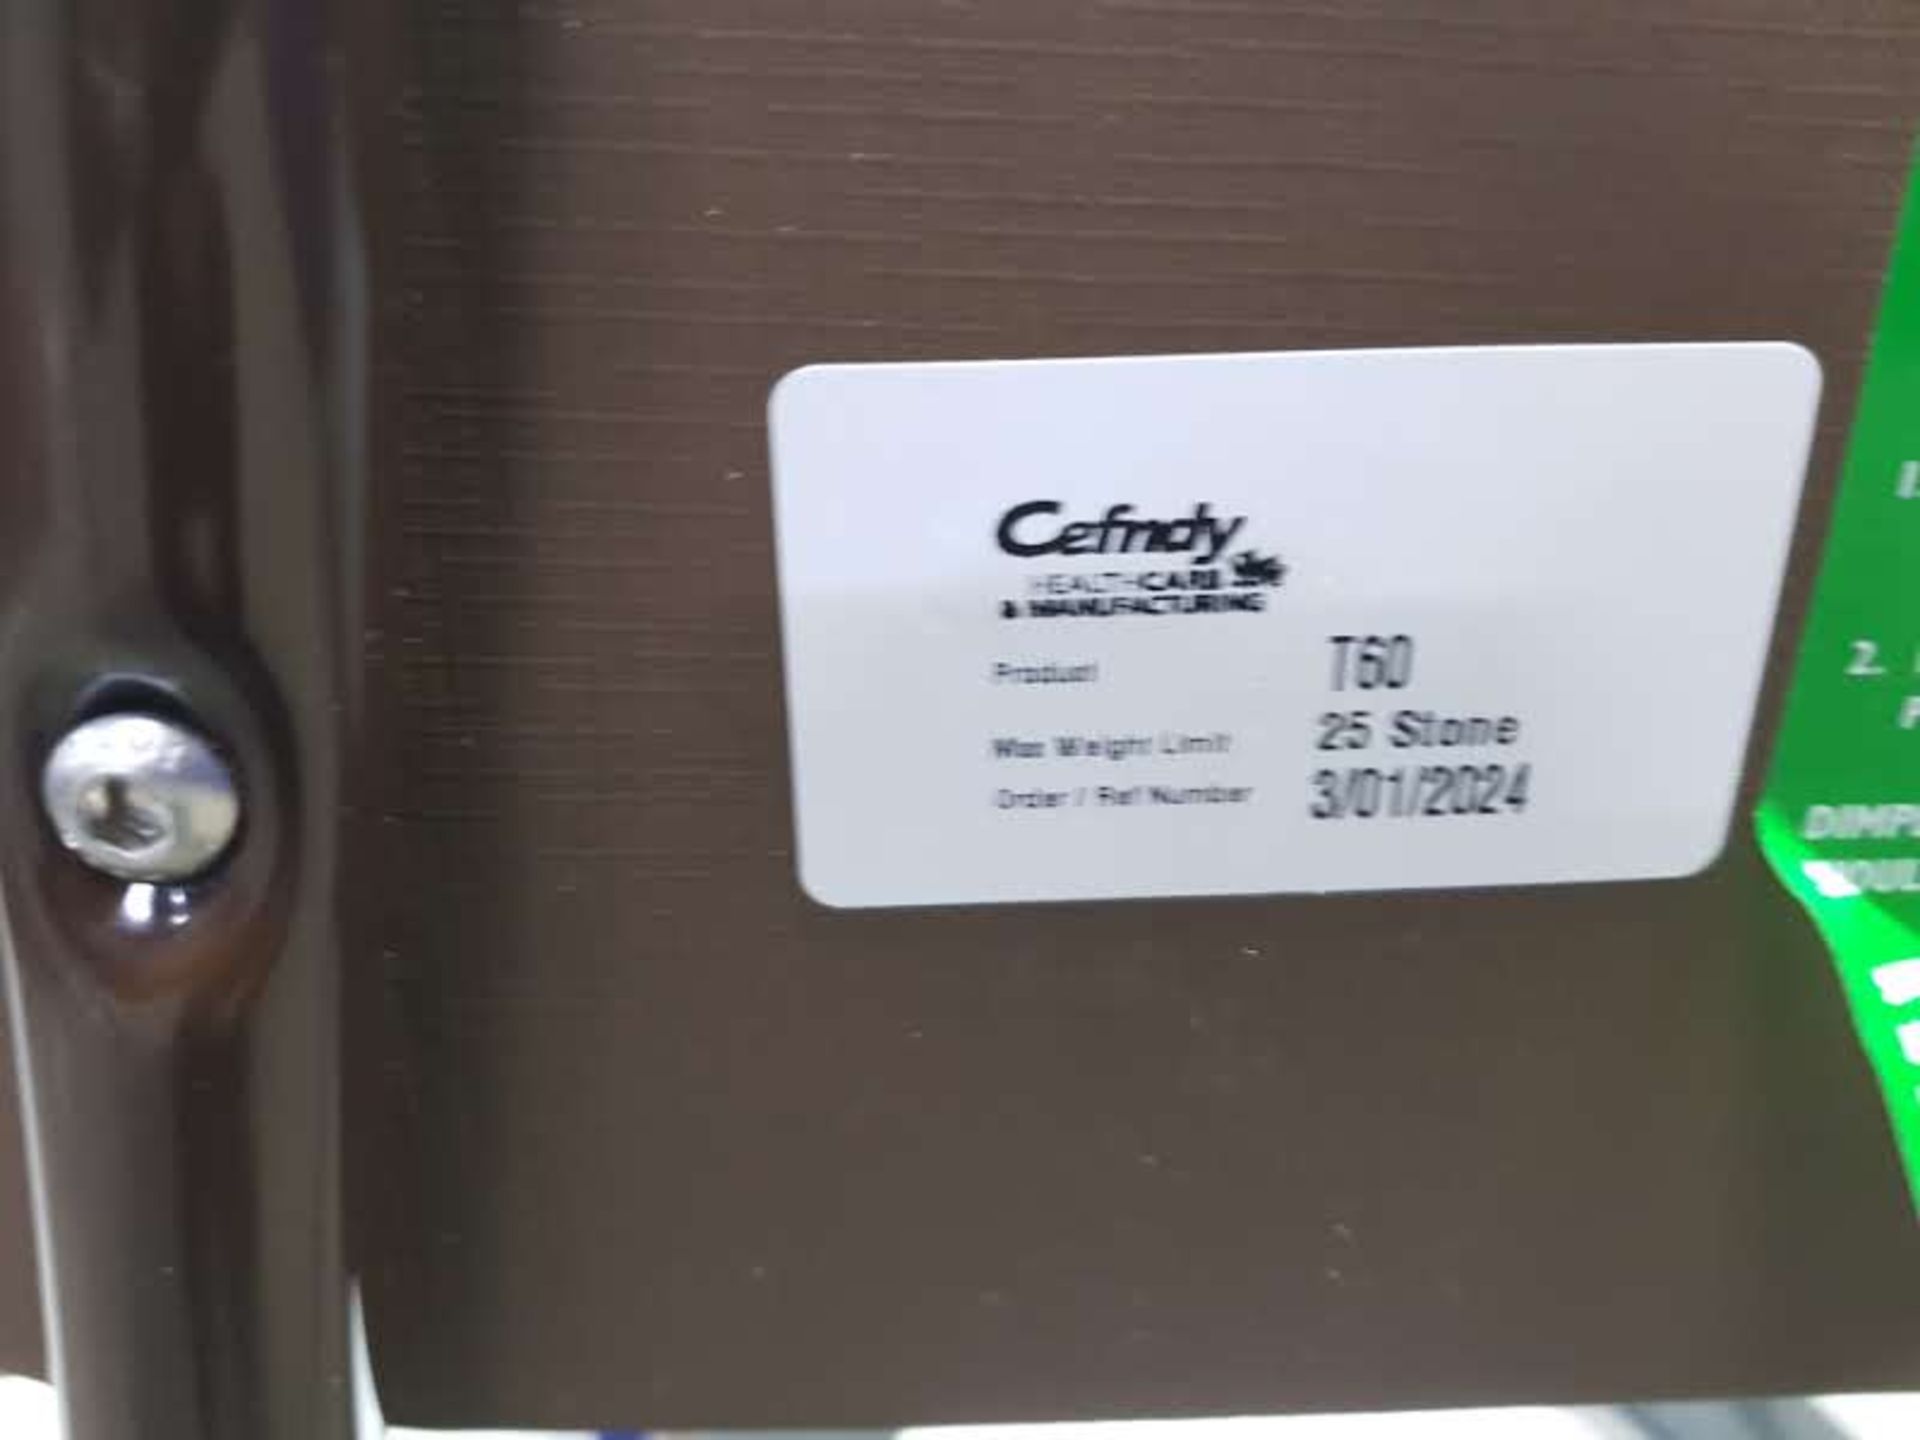 Cefindy Toilet Chair Height Adjustable - Image 4 of 5